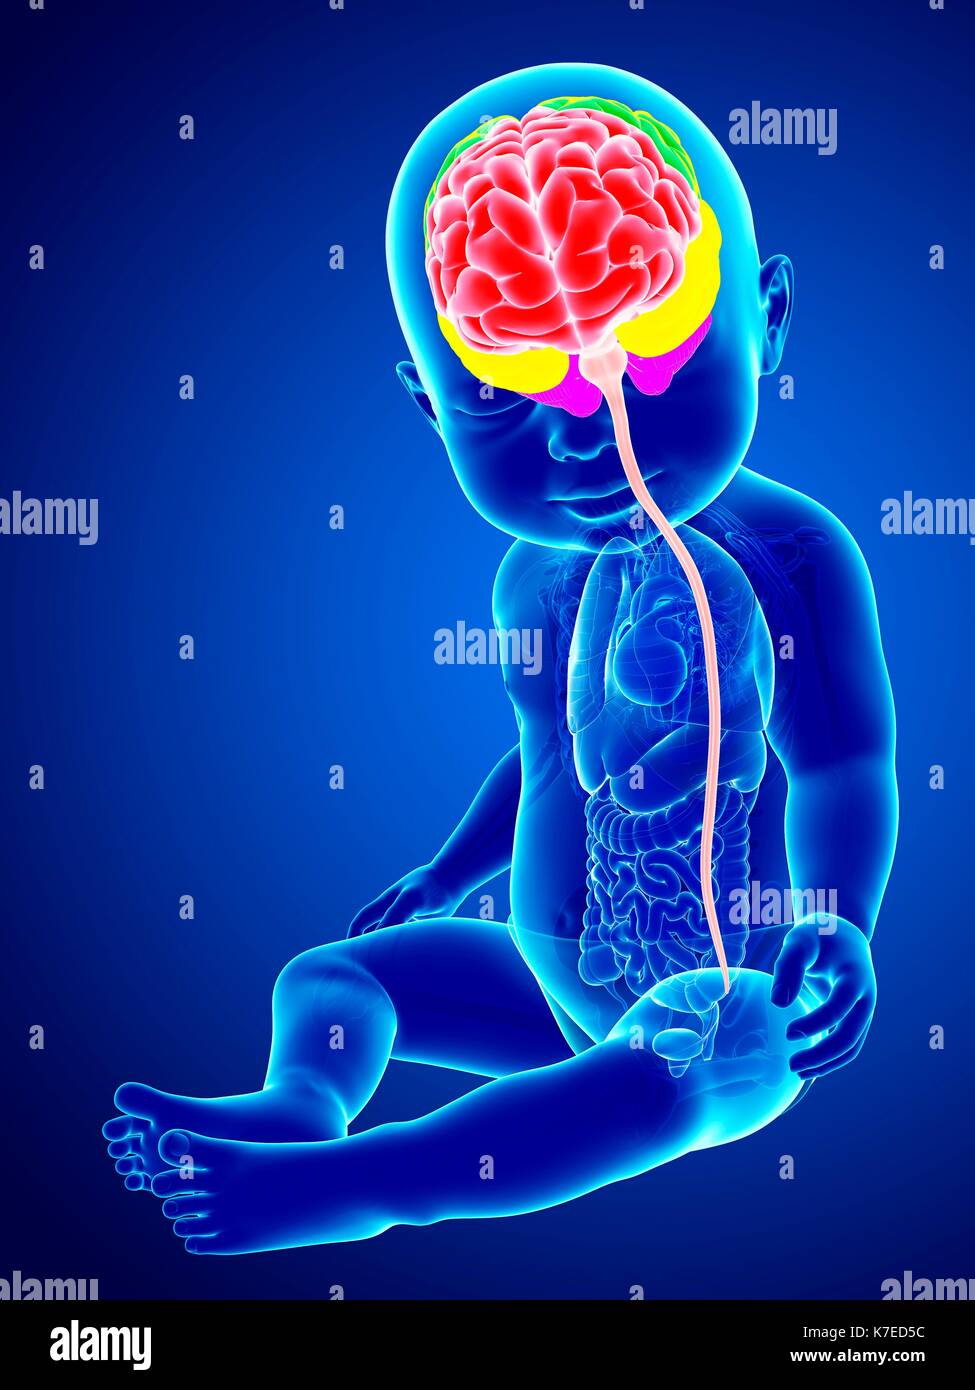 Illustration of a baby's brain regions and spinal cord. Stock Photo